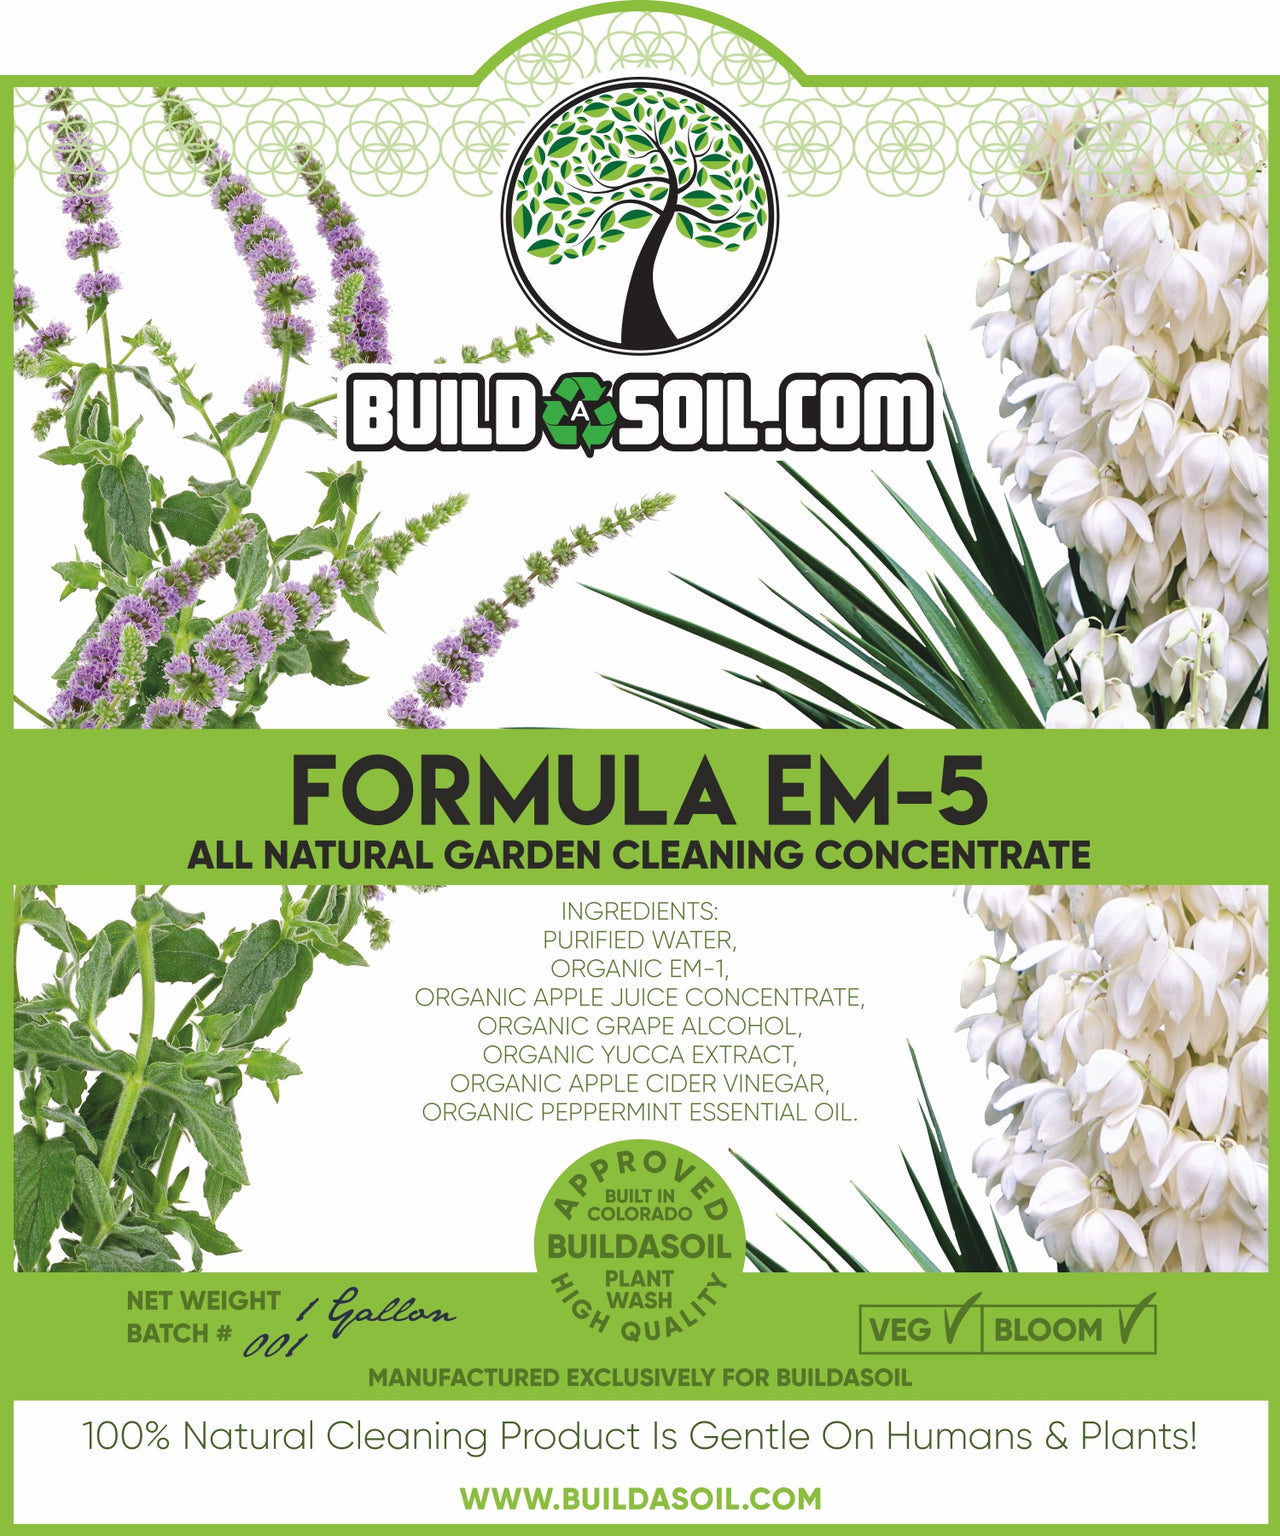 Formula EM-5 - All Natural Garden Cleaning Concentrate